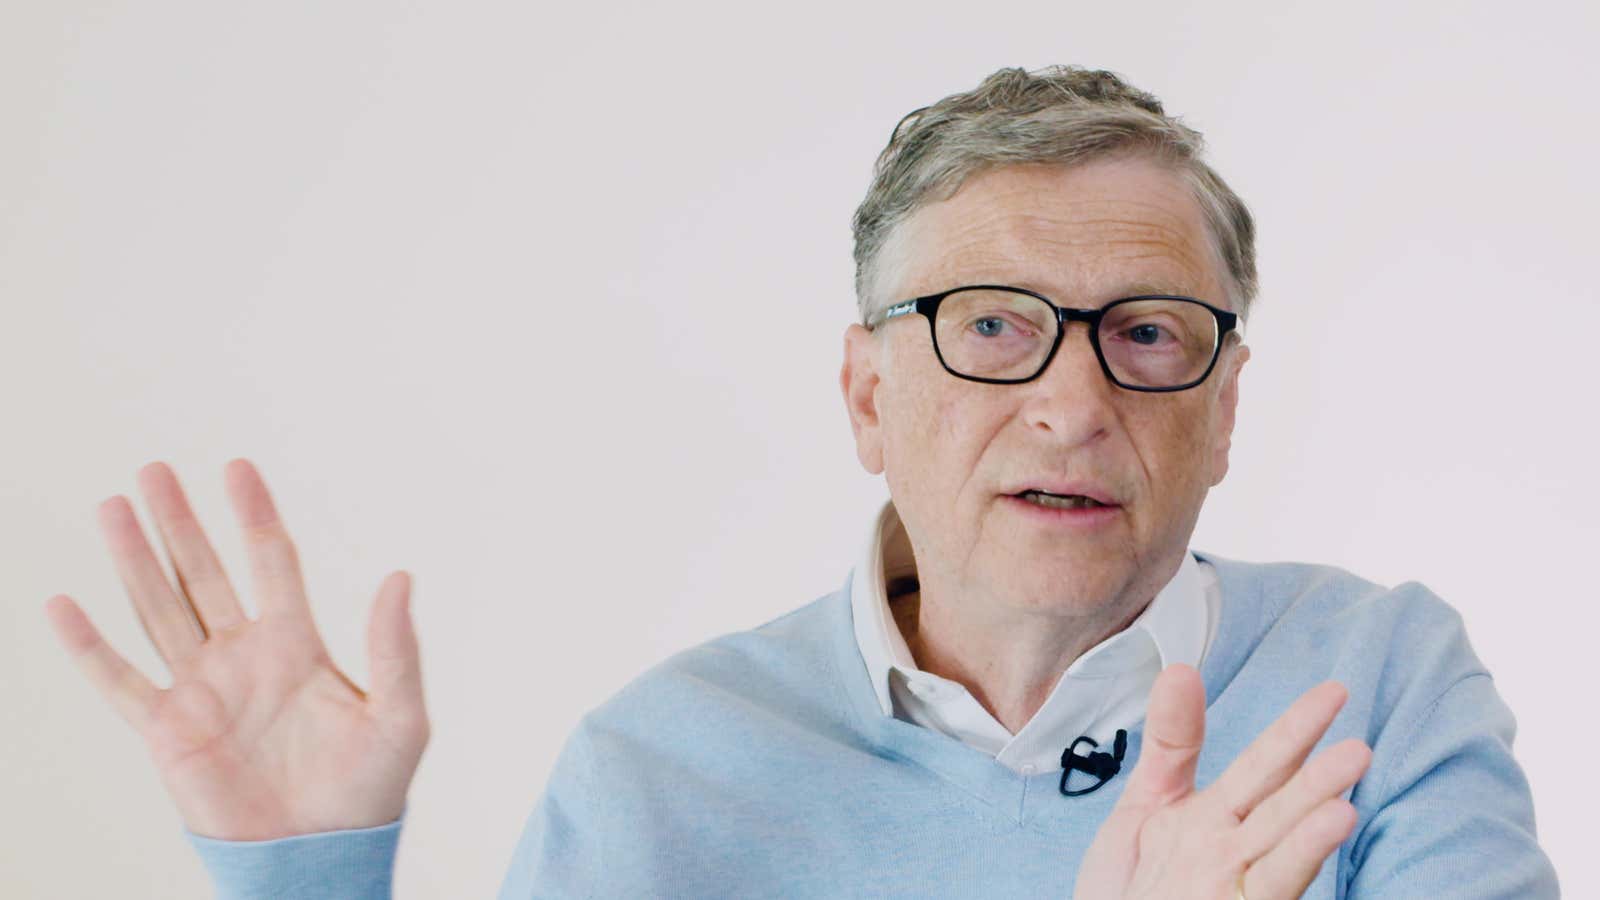 Bill Gates believes that Global Epidemic Response and Mobilization (GERM) will prevent the next pandemic.